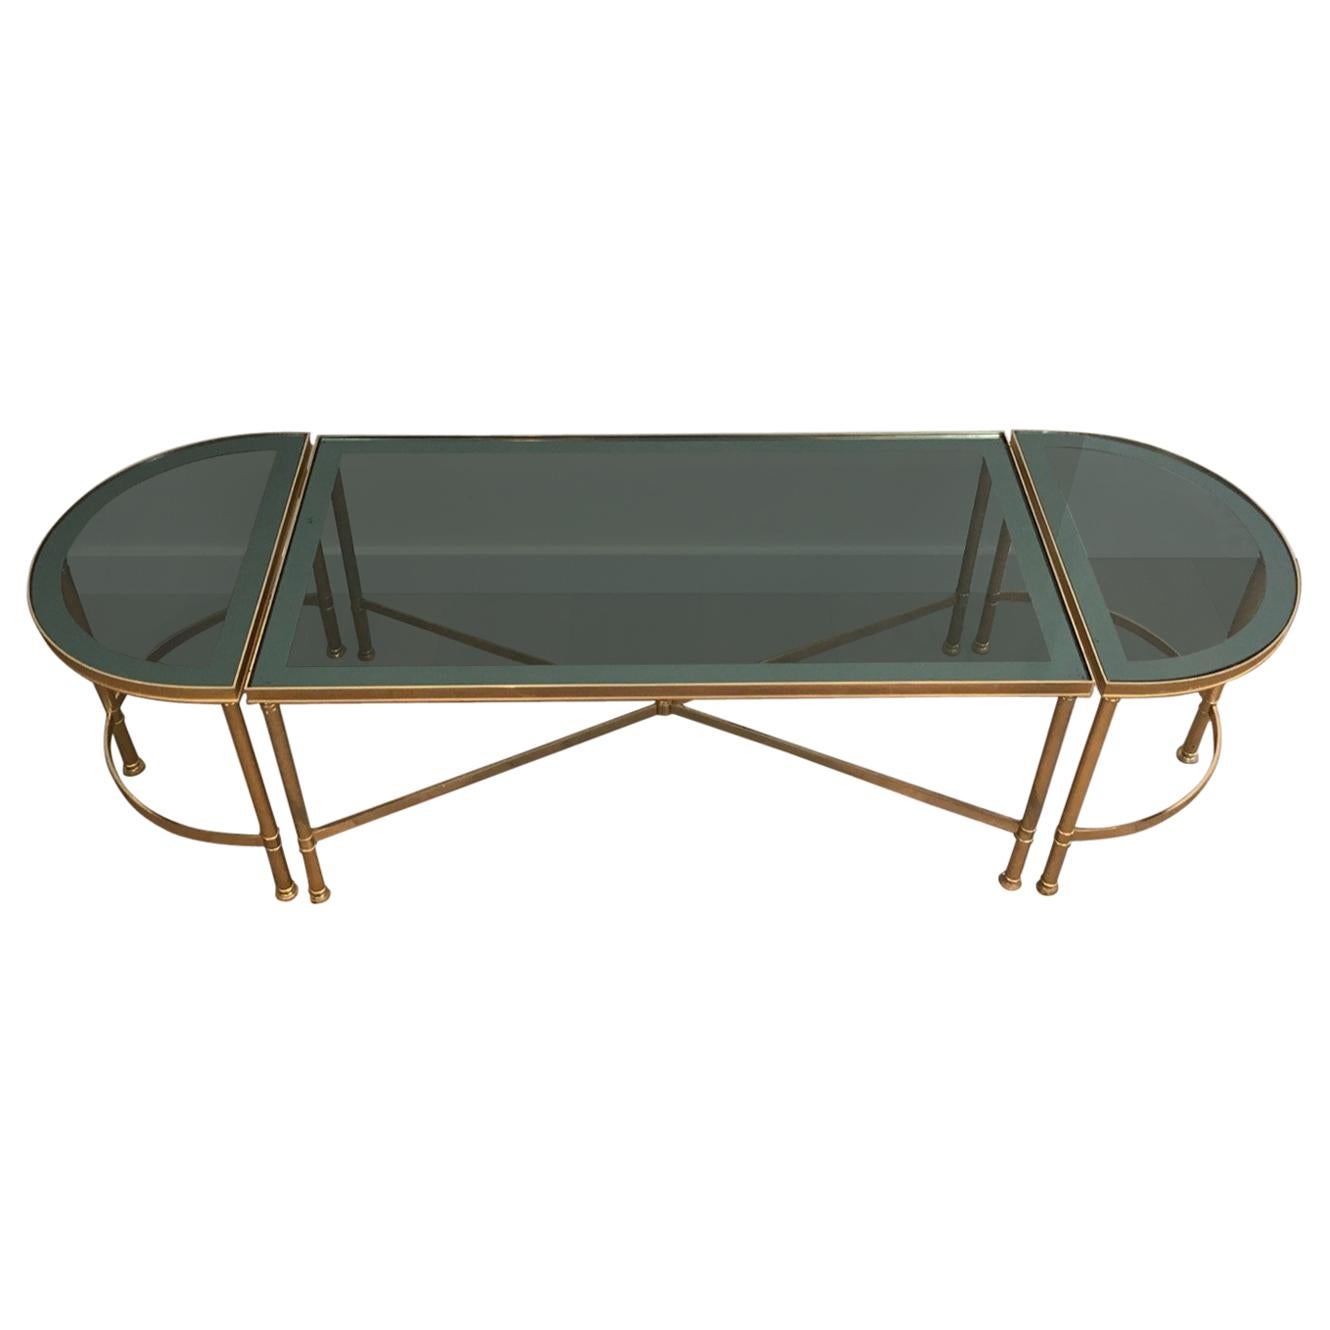 Three Parts Gold Gilt Nickel Coffee Table with Blueish Glass Tops, French, 1970s